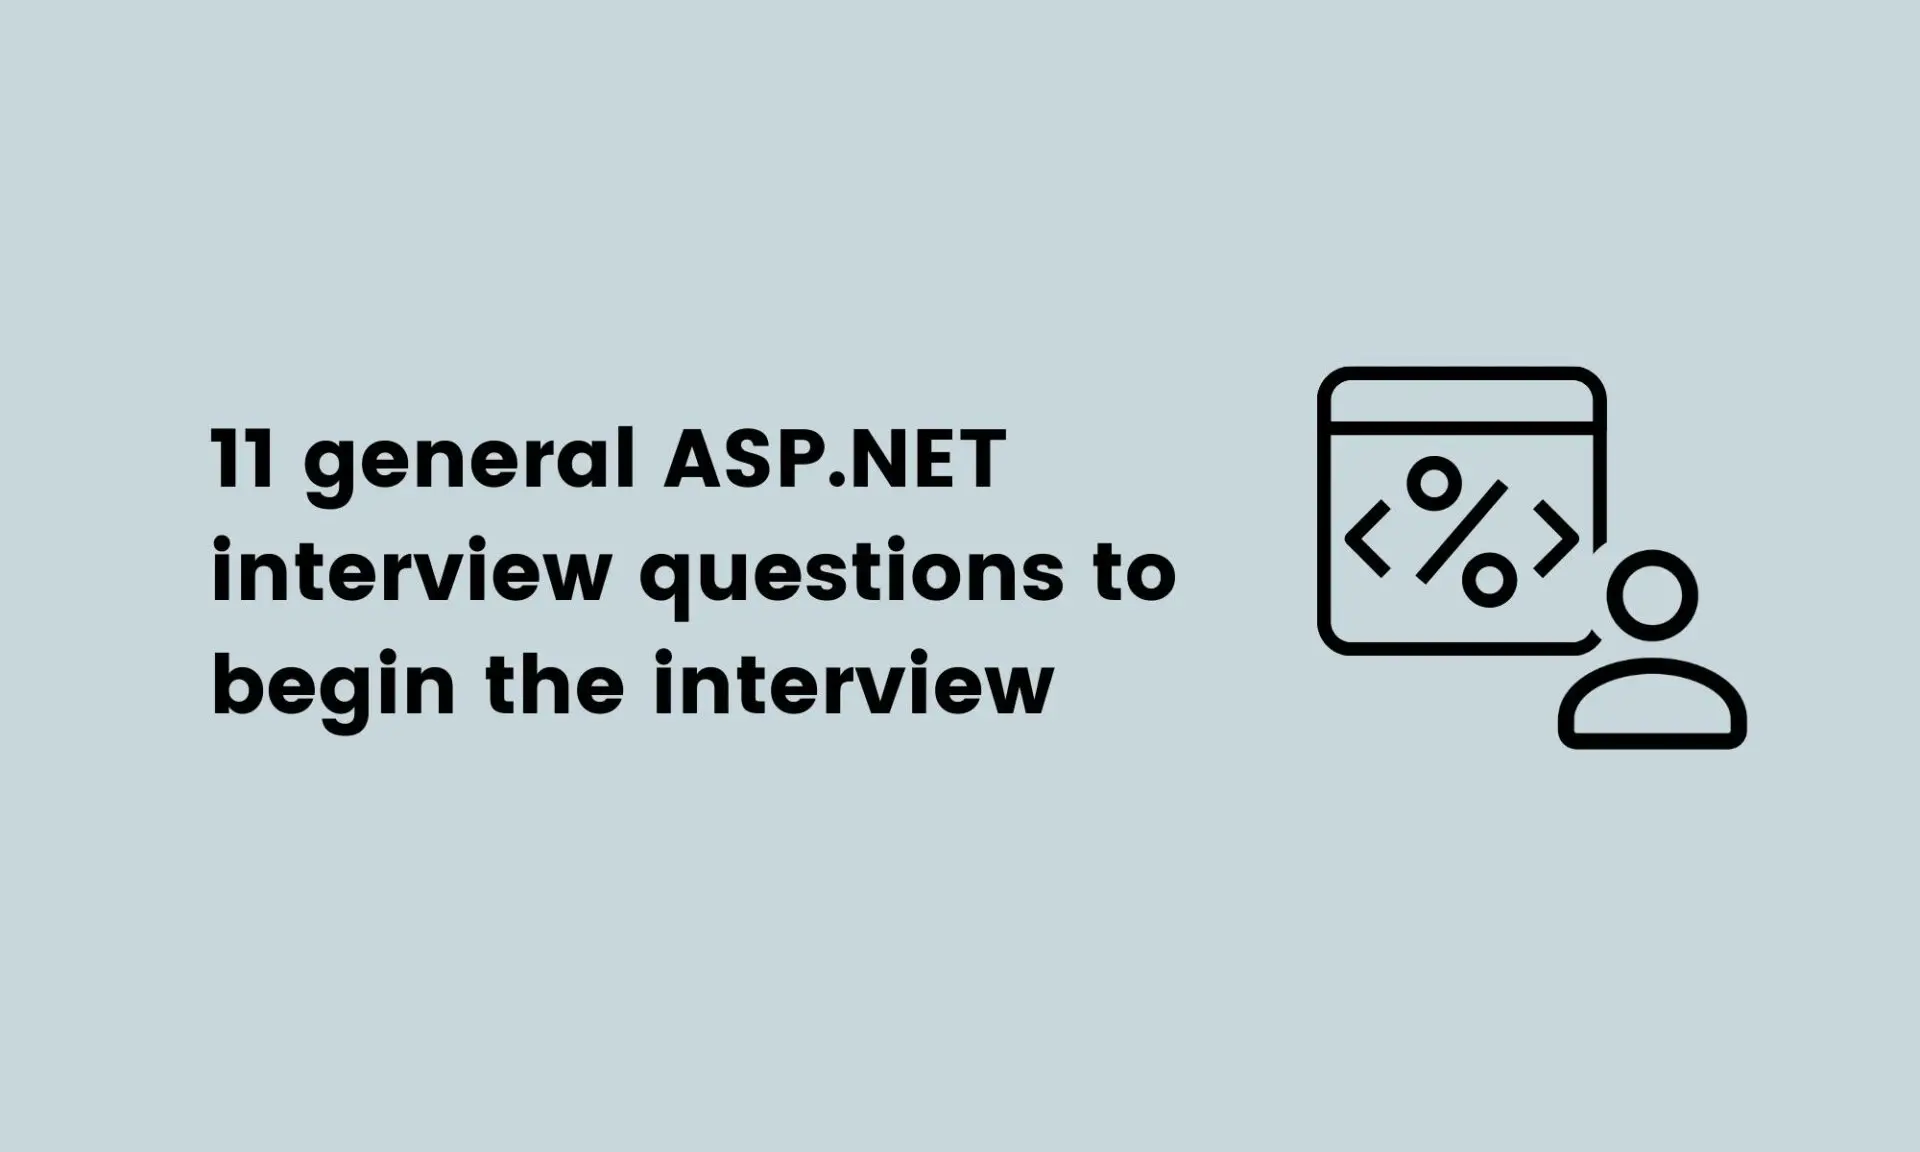 11 general ASP.NET interview questions to begin the interview